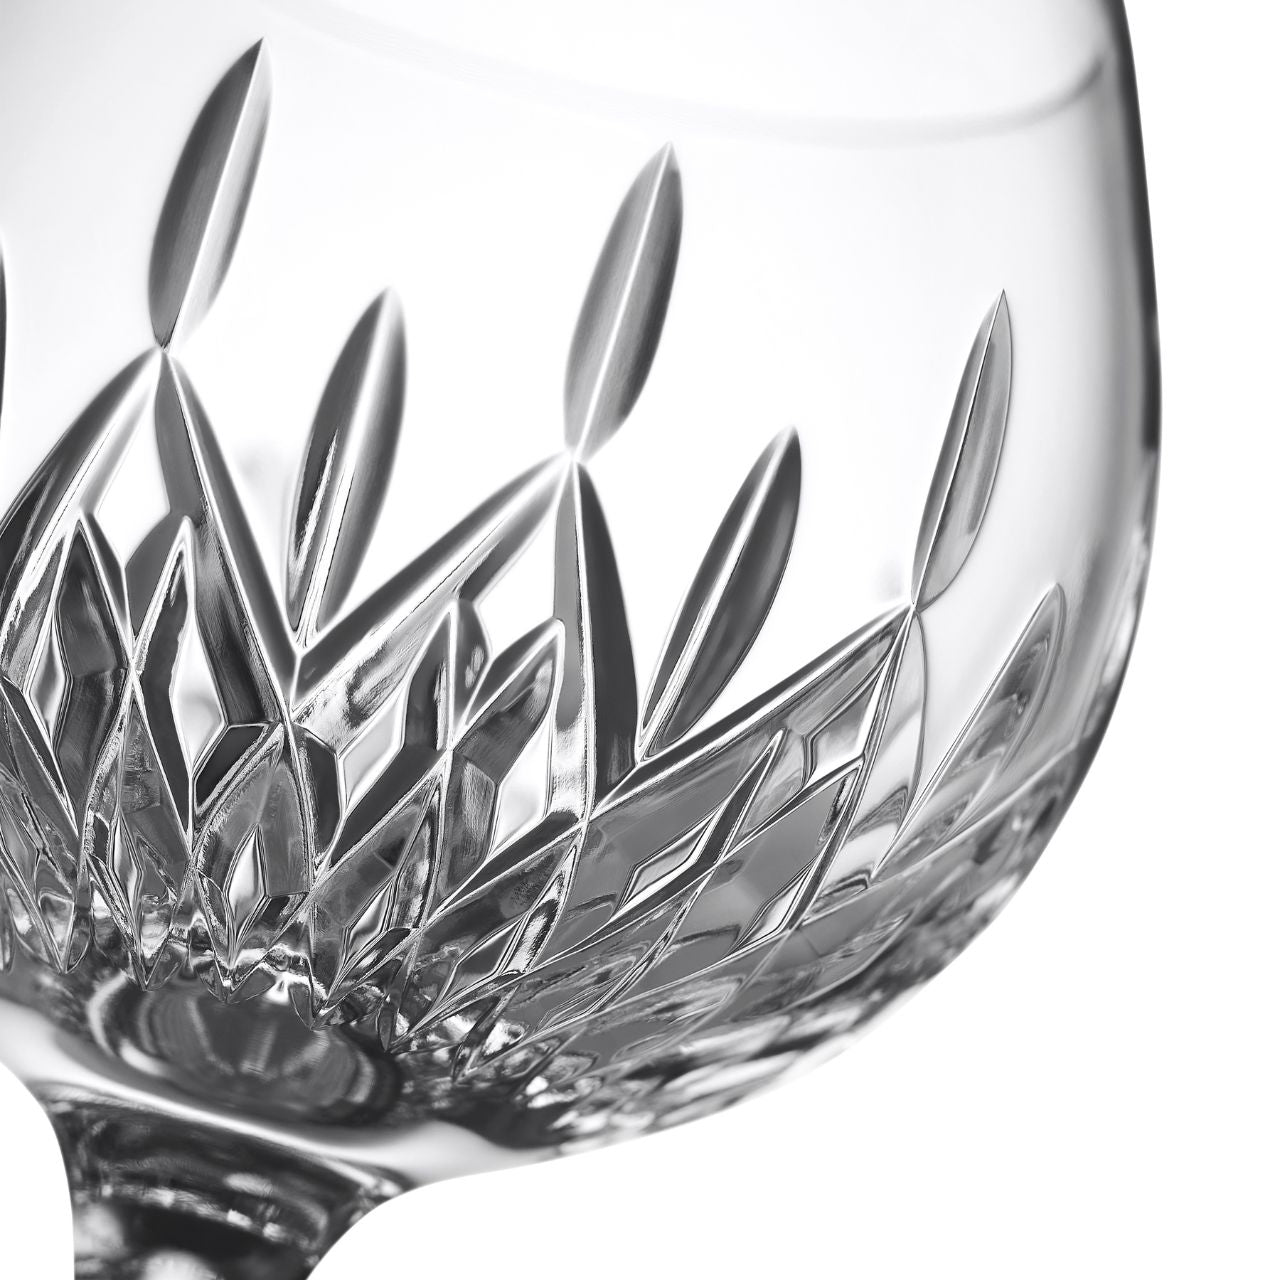 Waterford Crystal Gin Journeys Lismore Balloon Glass Pair  Gin Journeys is a collection created for the optimum Gin experience. Steeped in history with inspiration being drawn from Waterford's heritage to gin, dating back to the Victorian era. Waterford's striking range of gin glasses have been designed with tasting experts to help enrich the aromas and infuse the flavors of the botanicals.